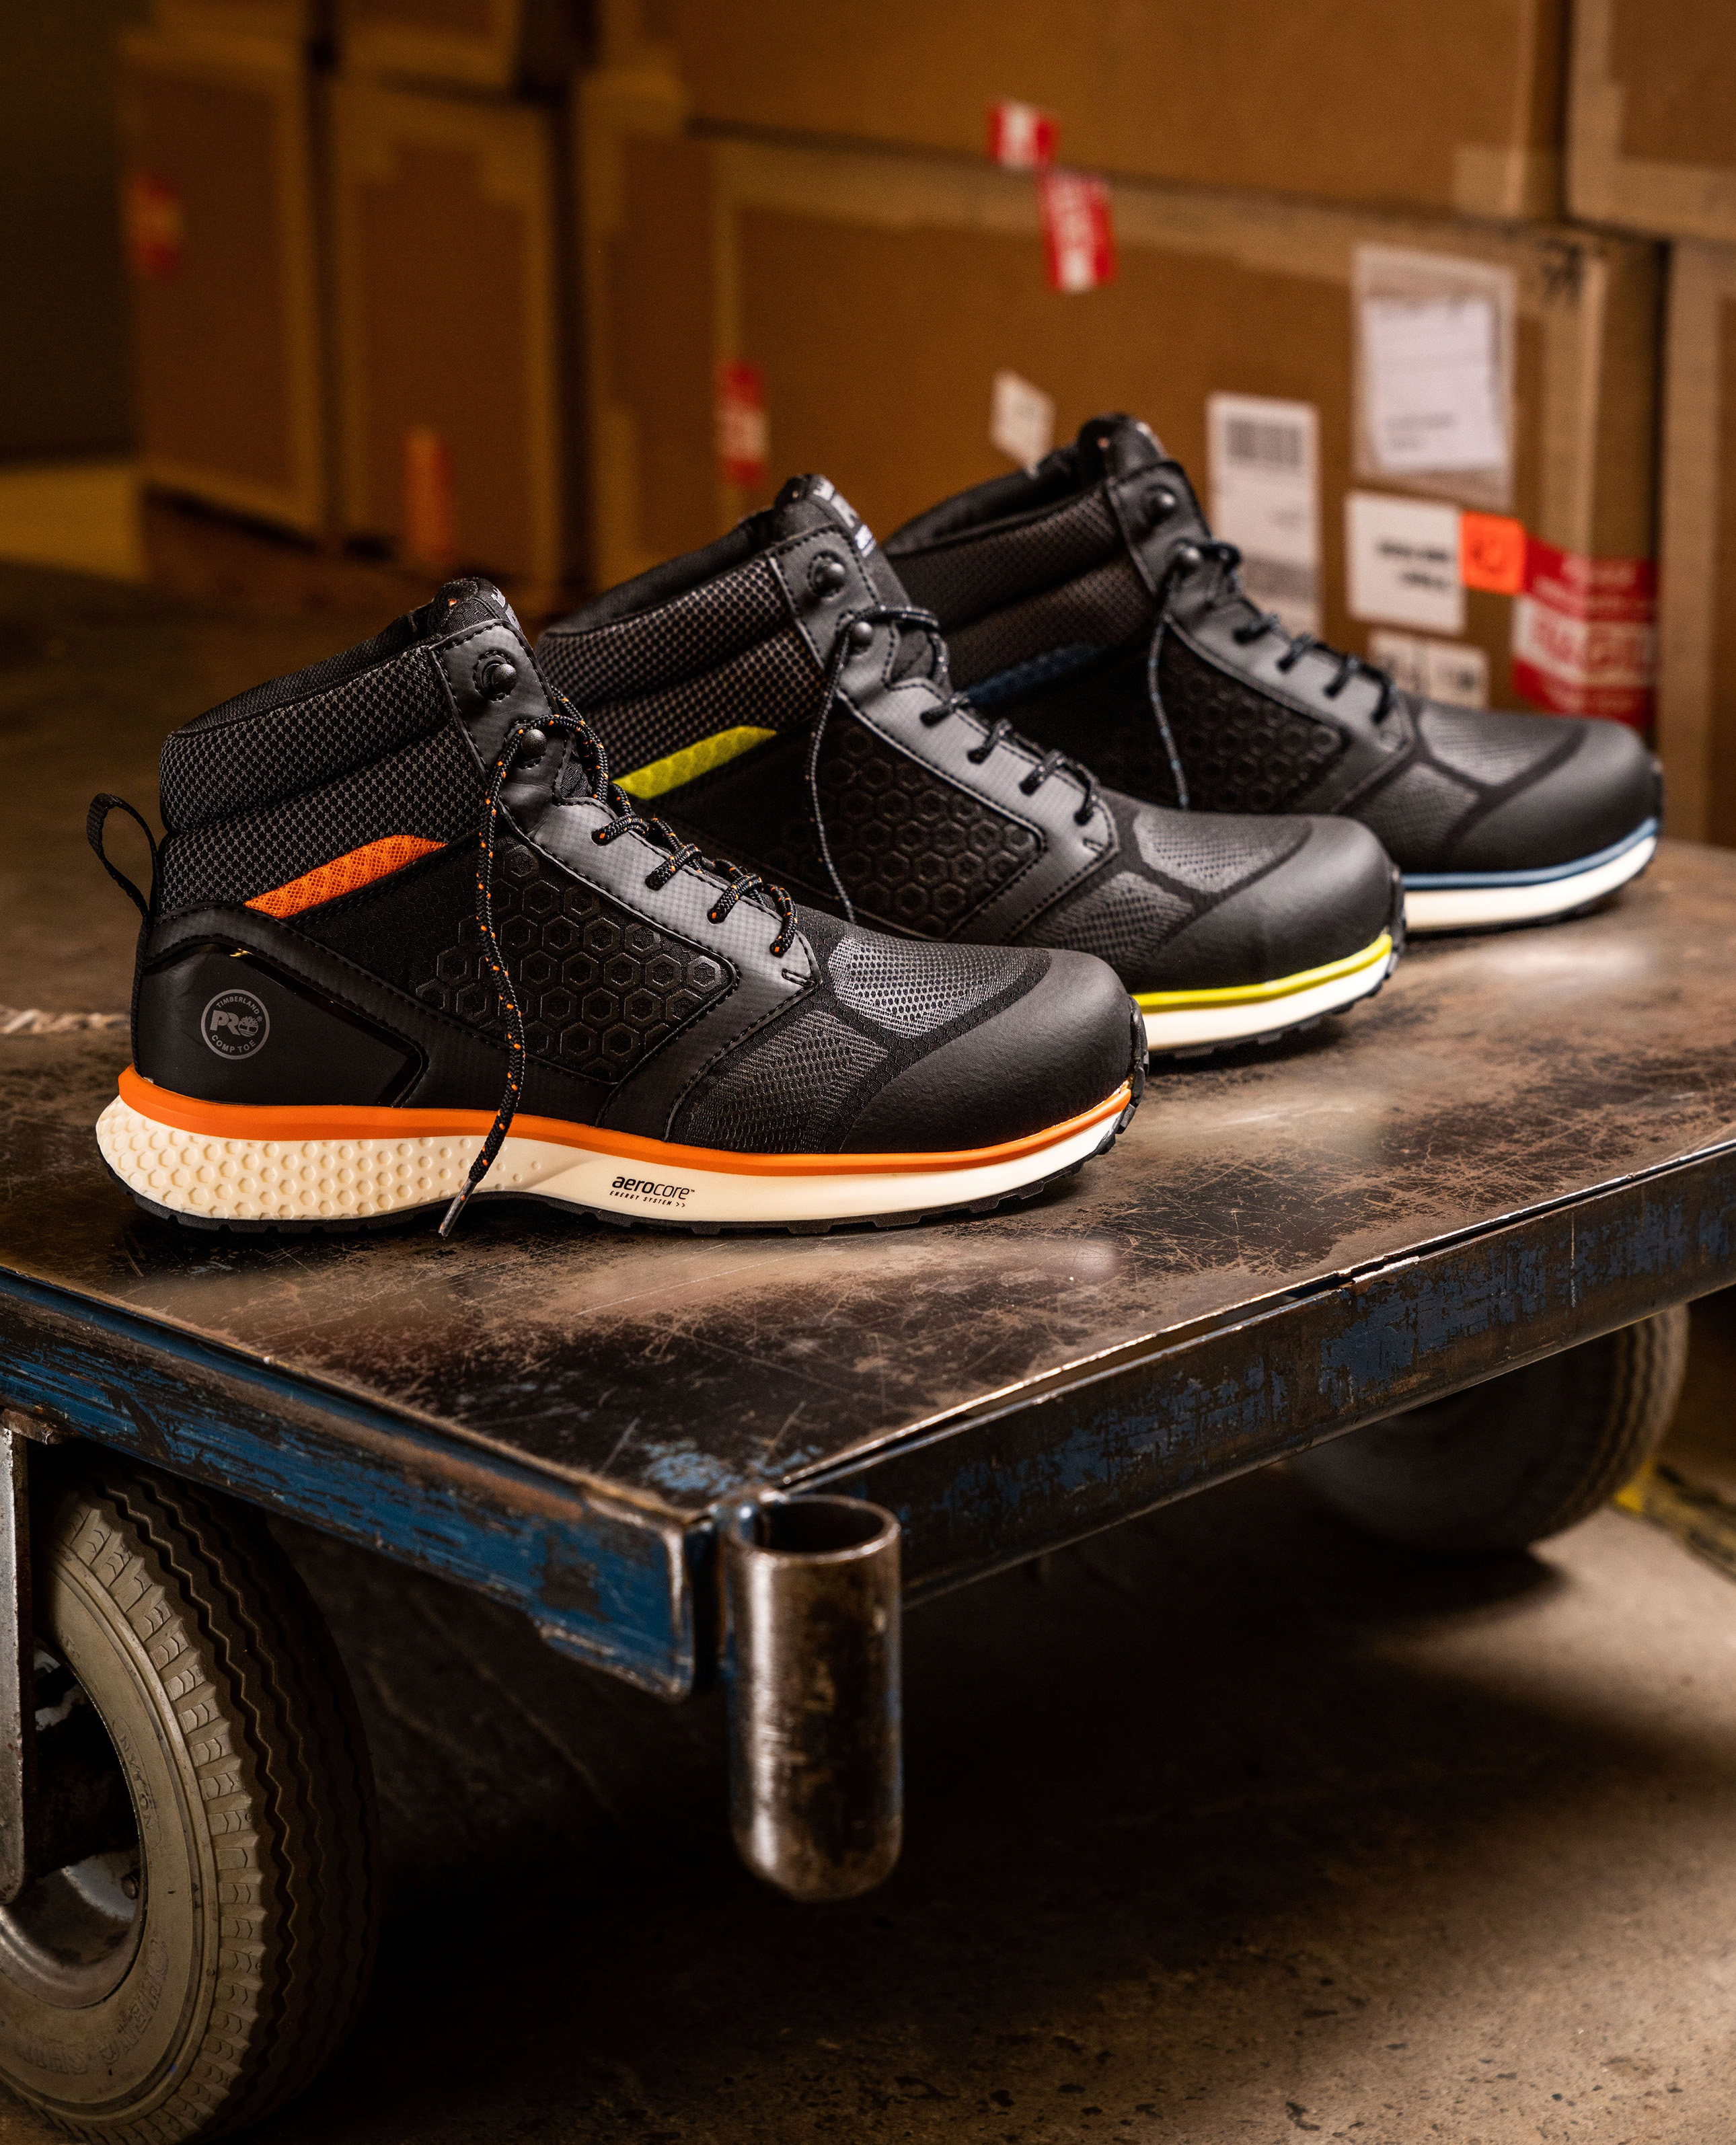 timberland pro safety shoes